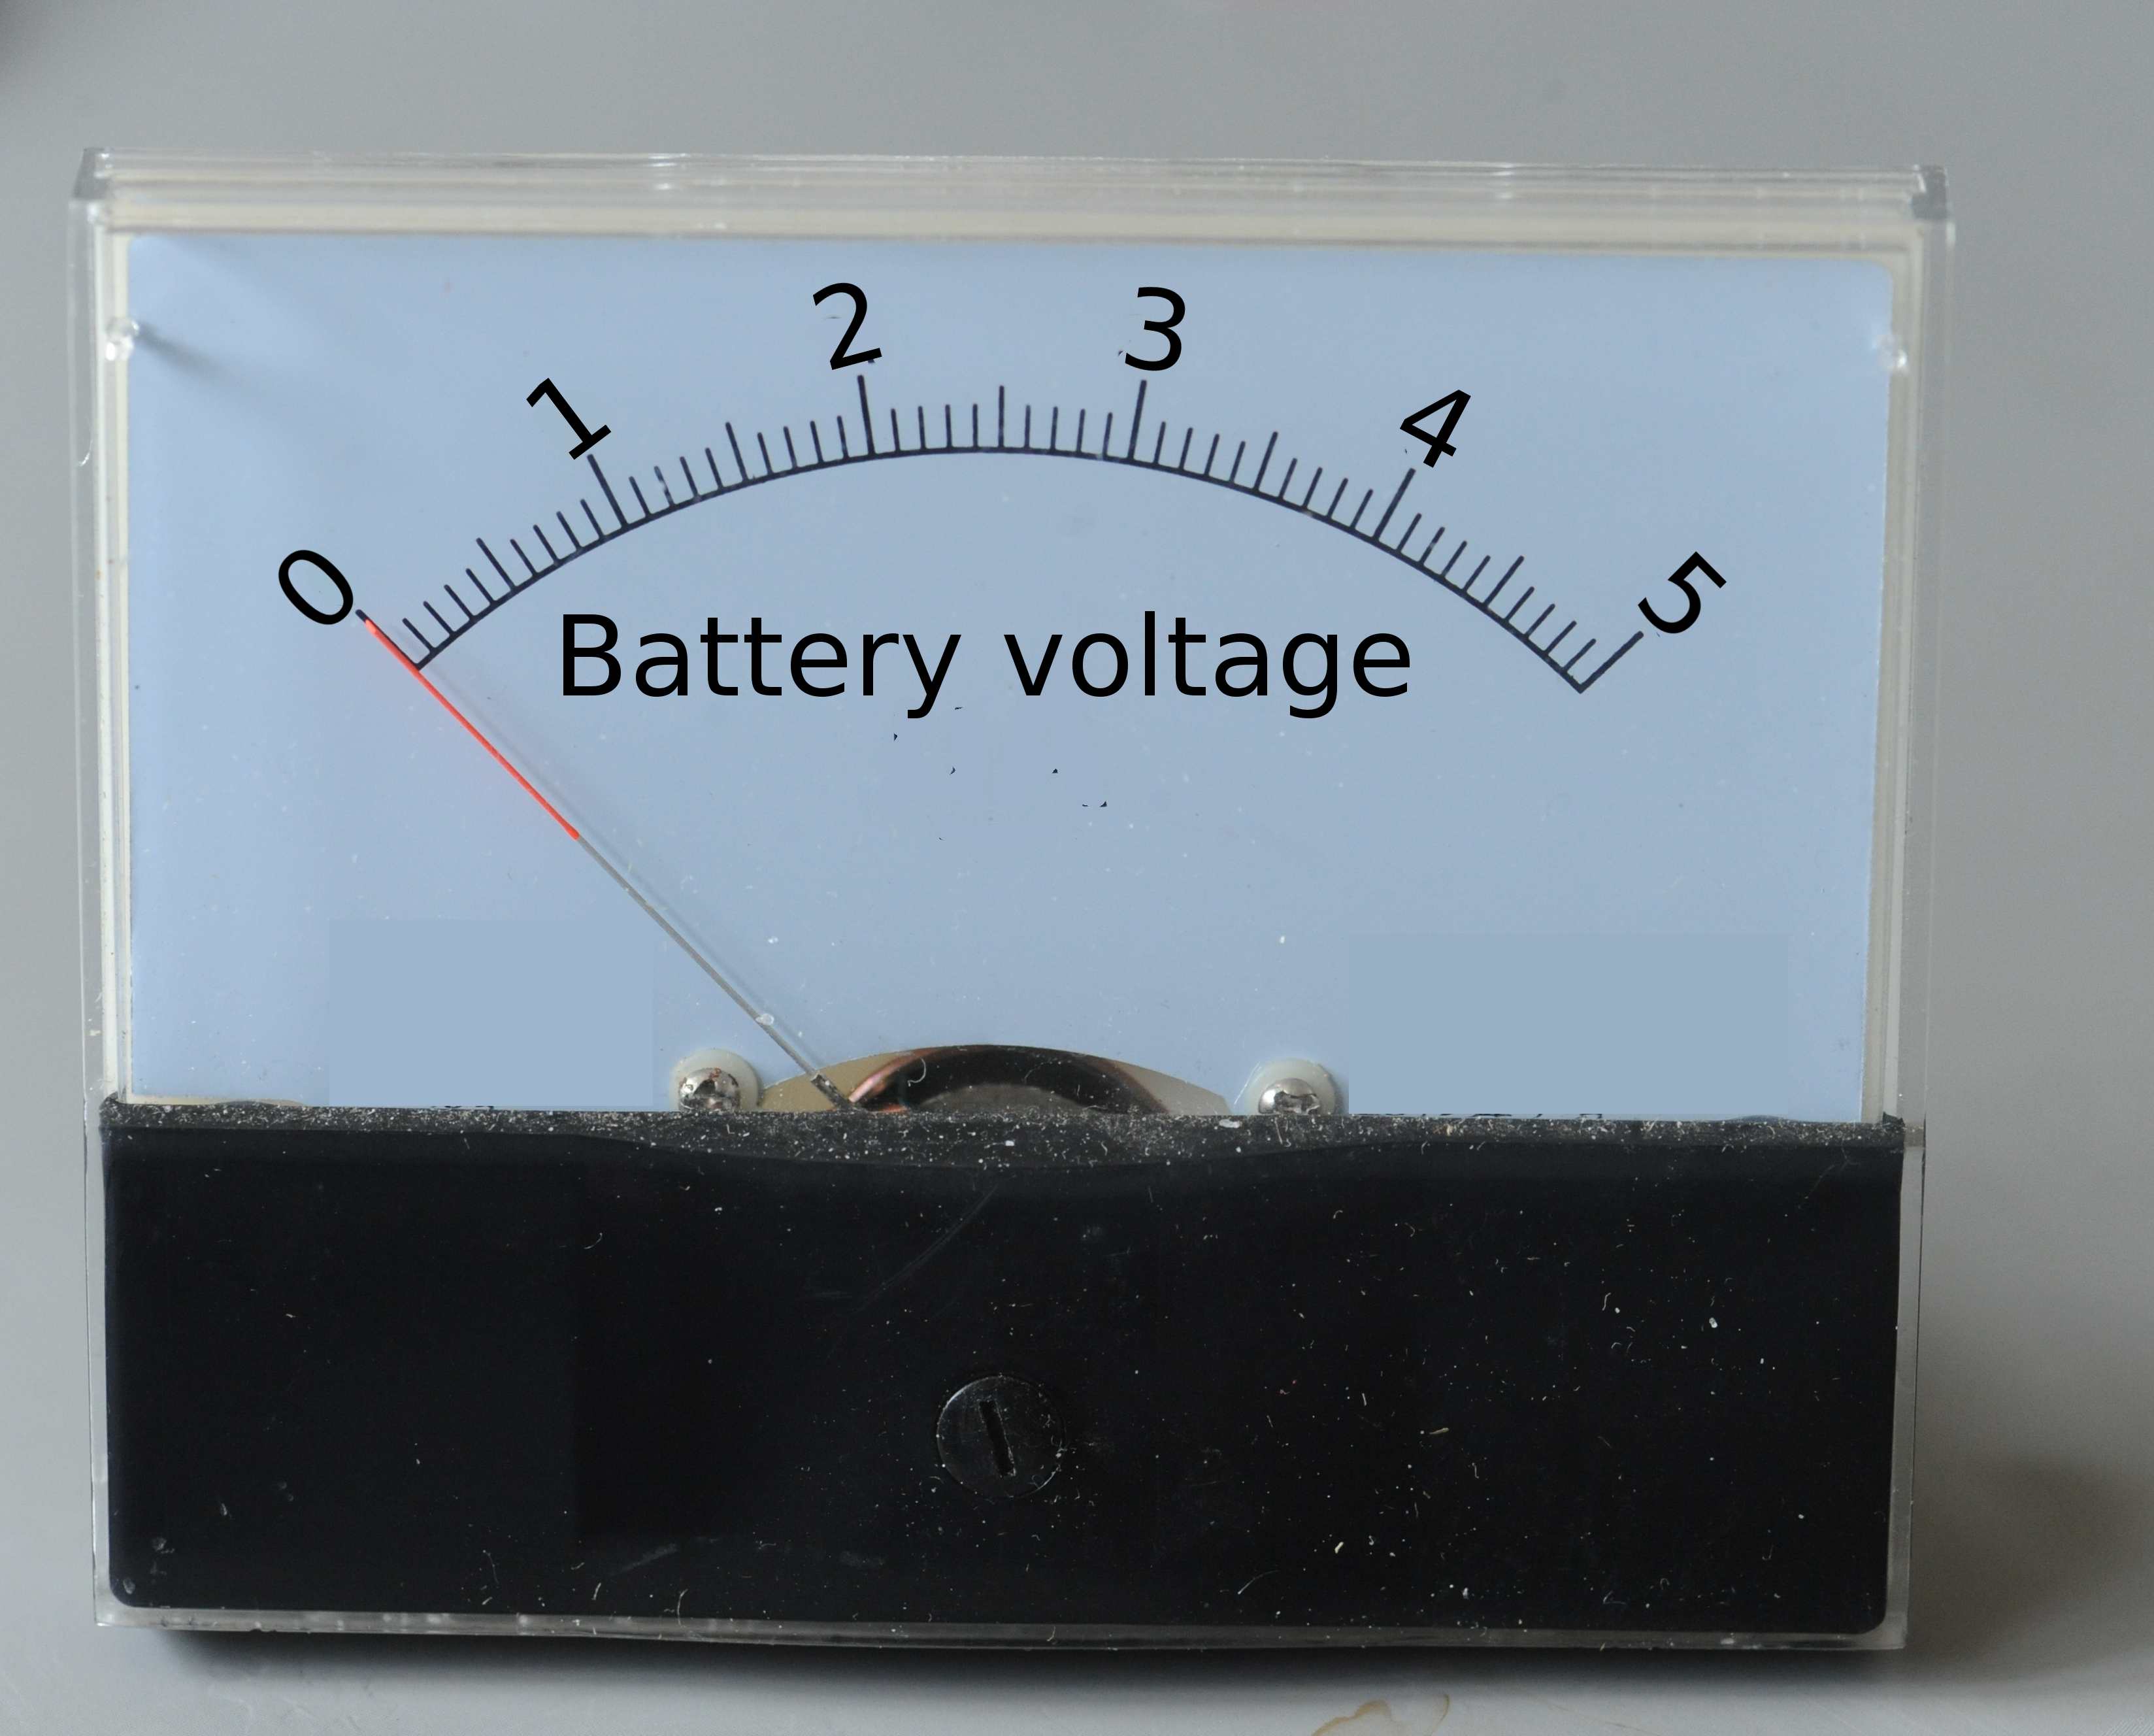 Ammeter converted to voltmeter